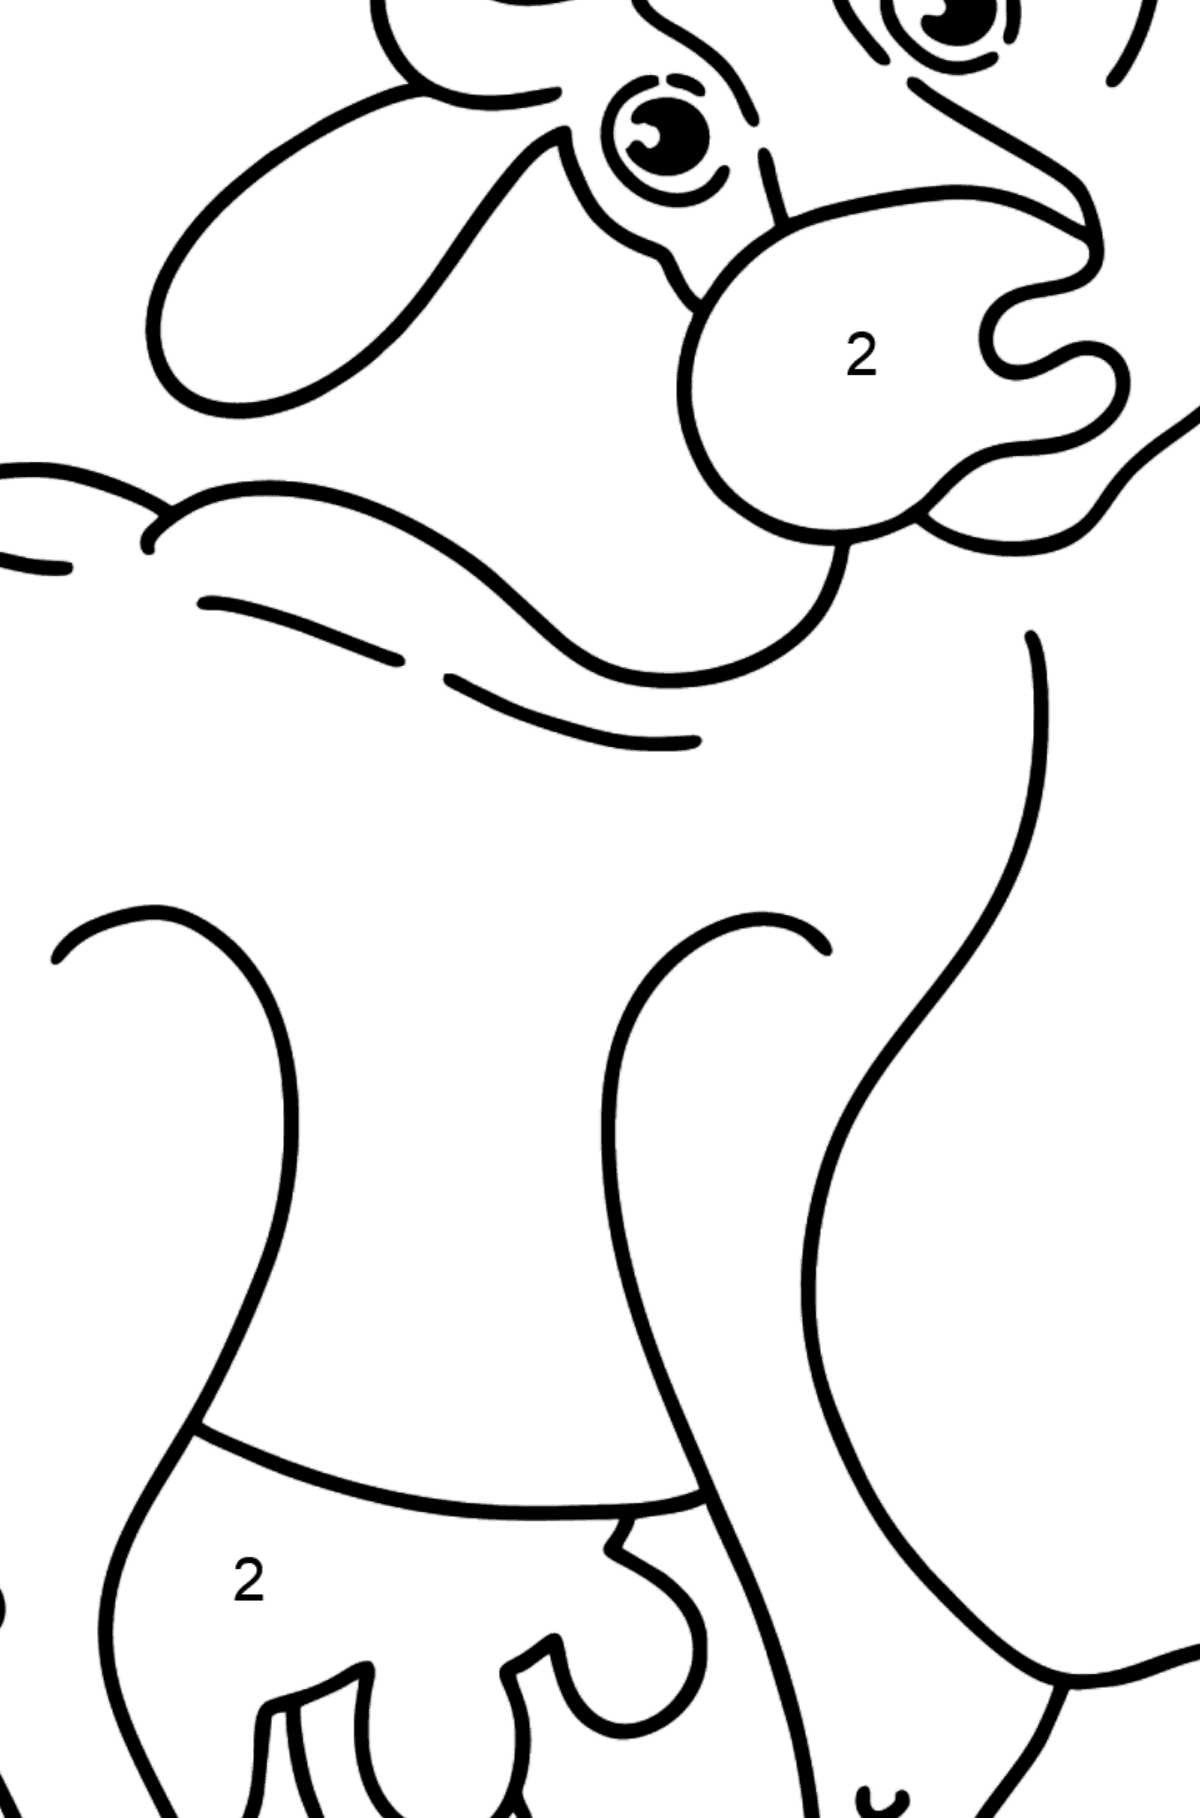 Cow coloring page - Coloring by Numbers for Kids